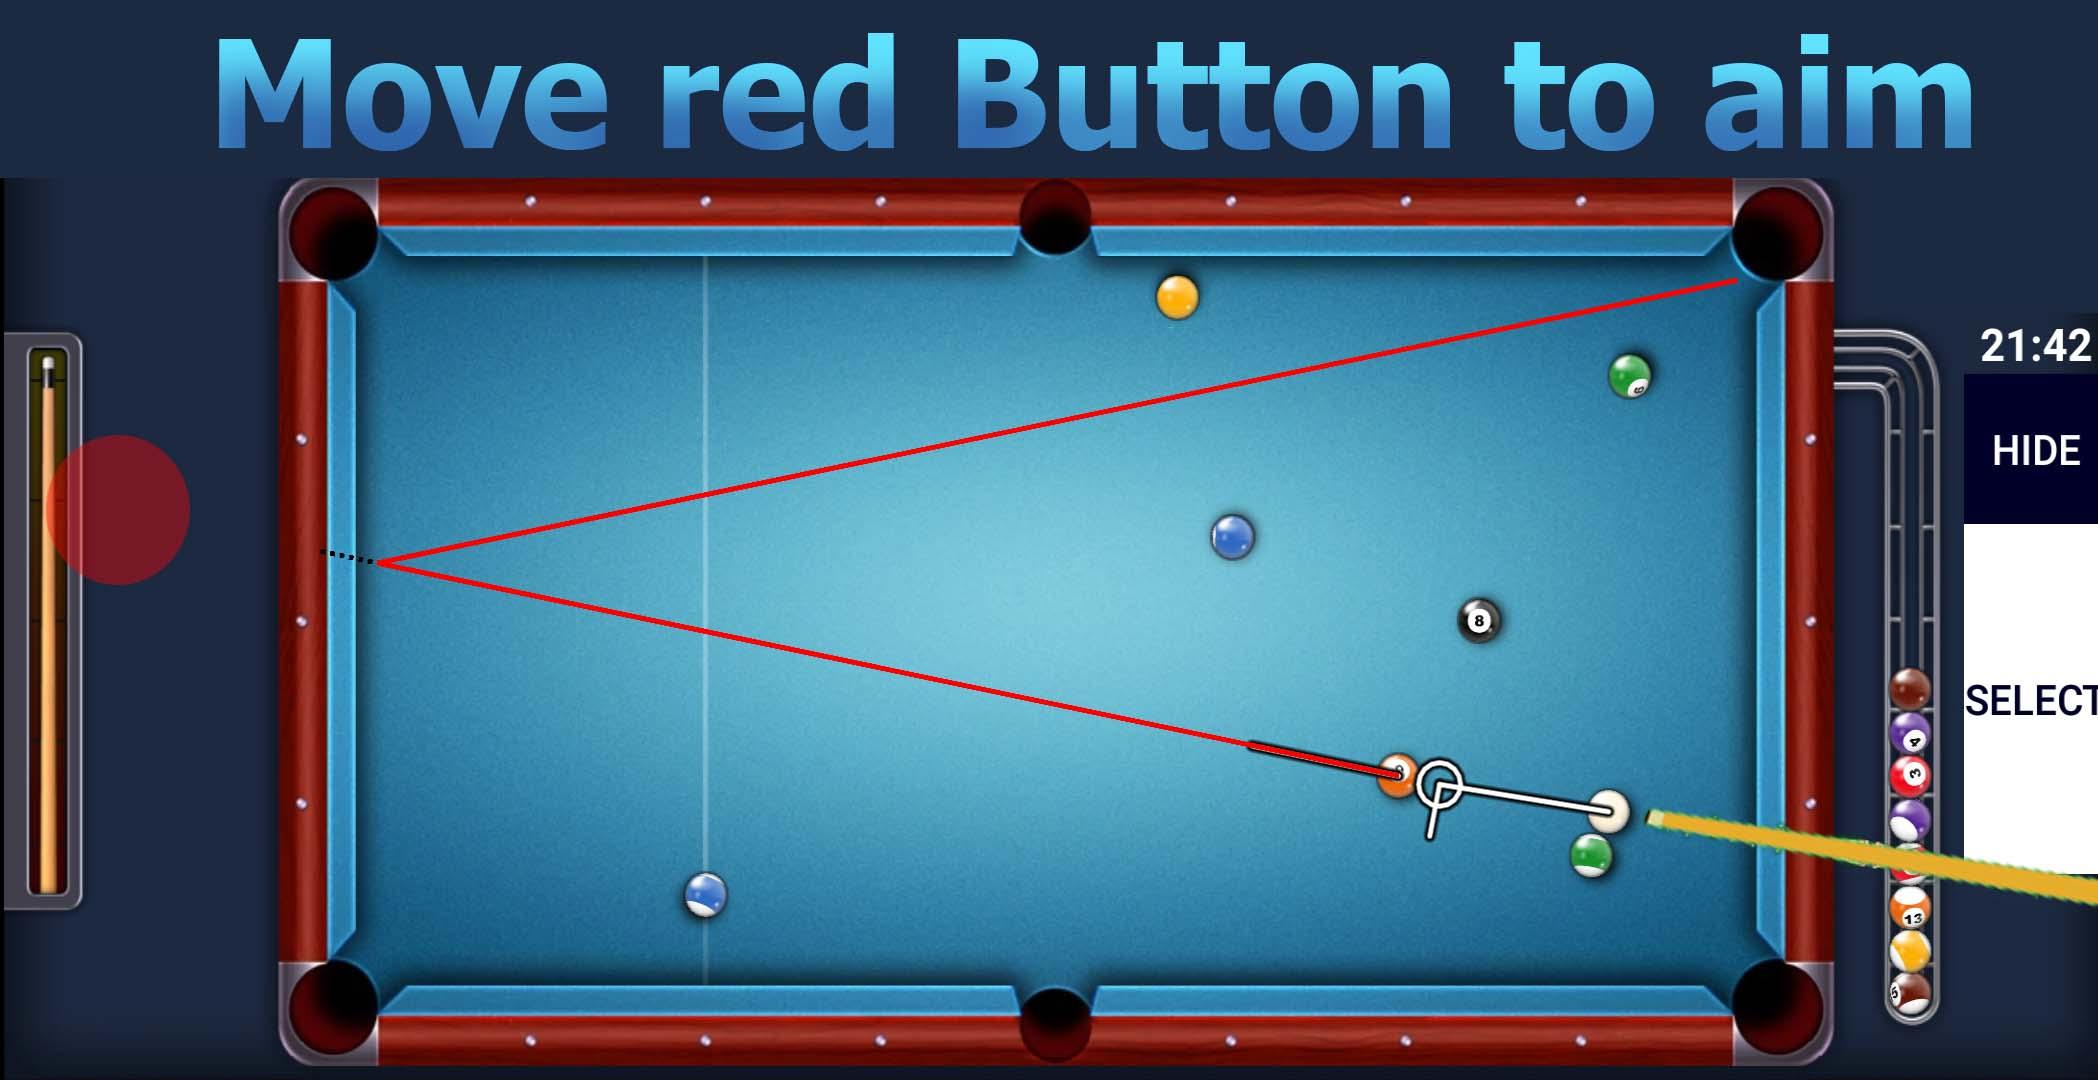 8 Ball Pool Trainer for Android - APK Download - 